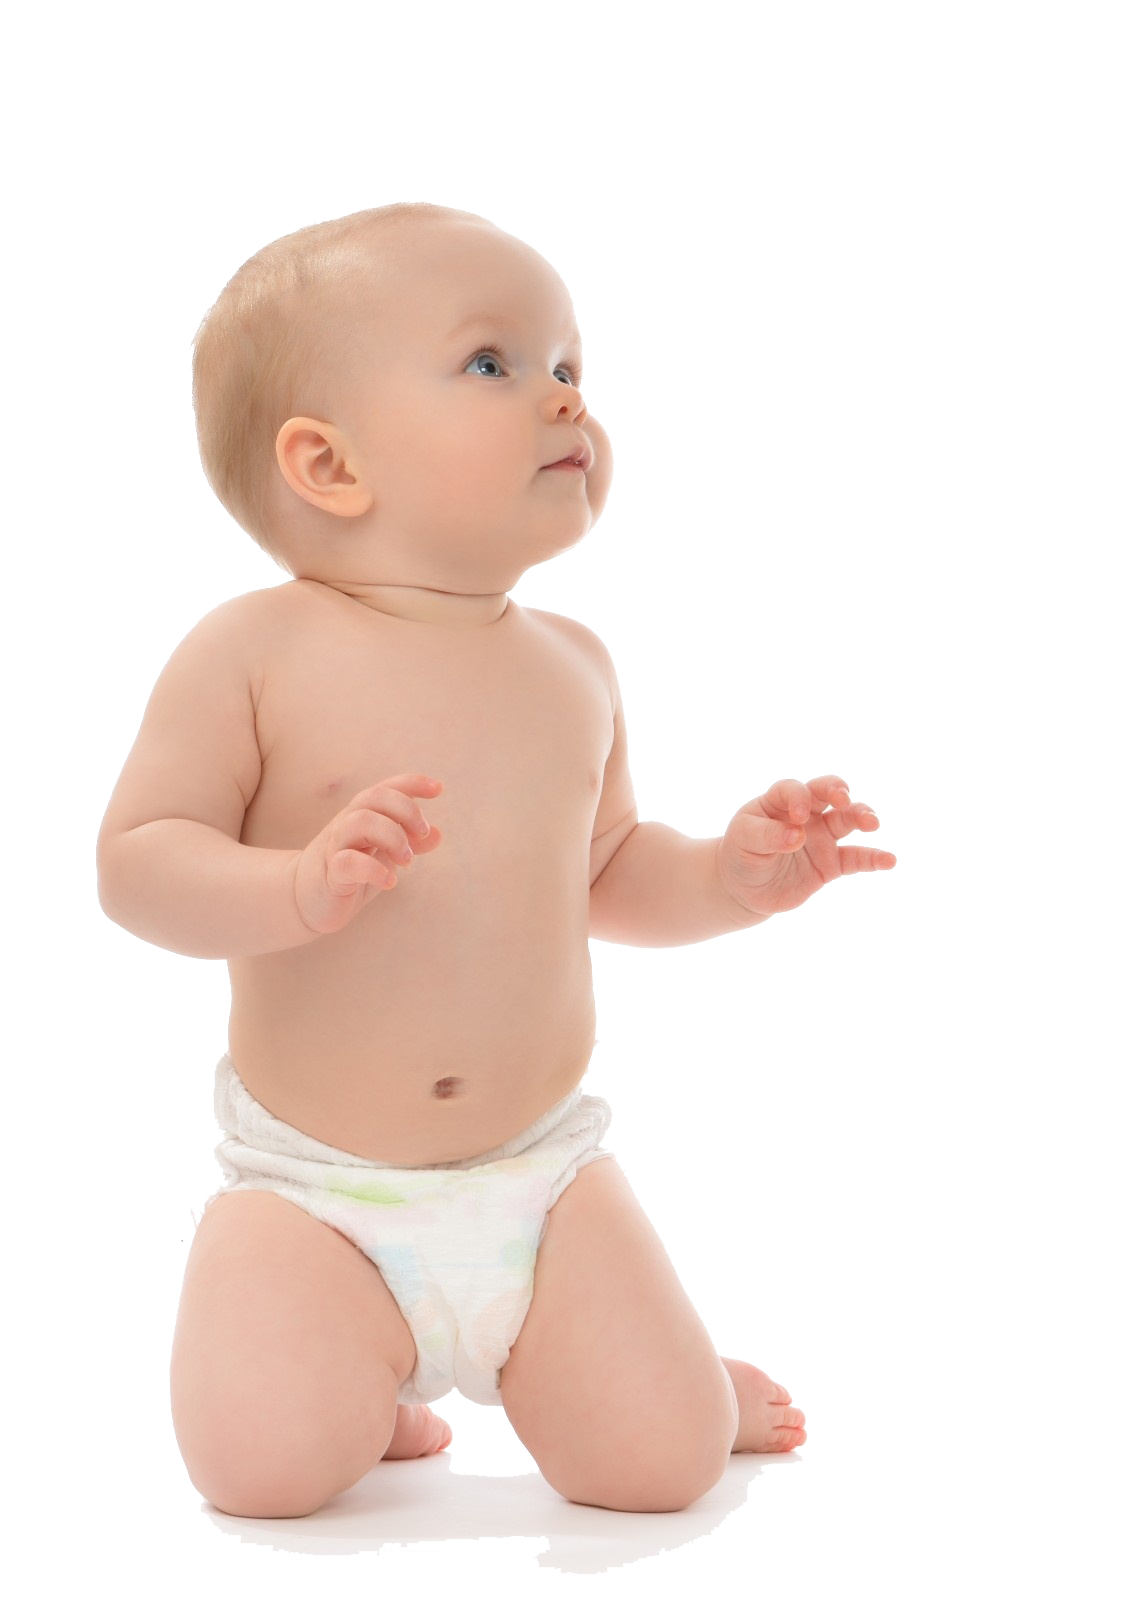 Baby PNG Image High Quality PNG Image